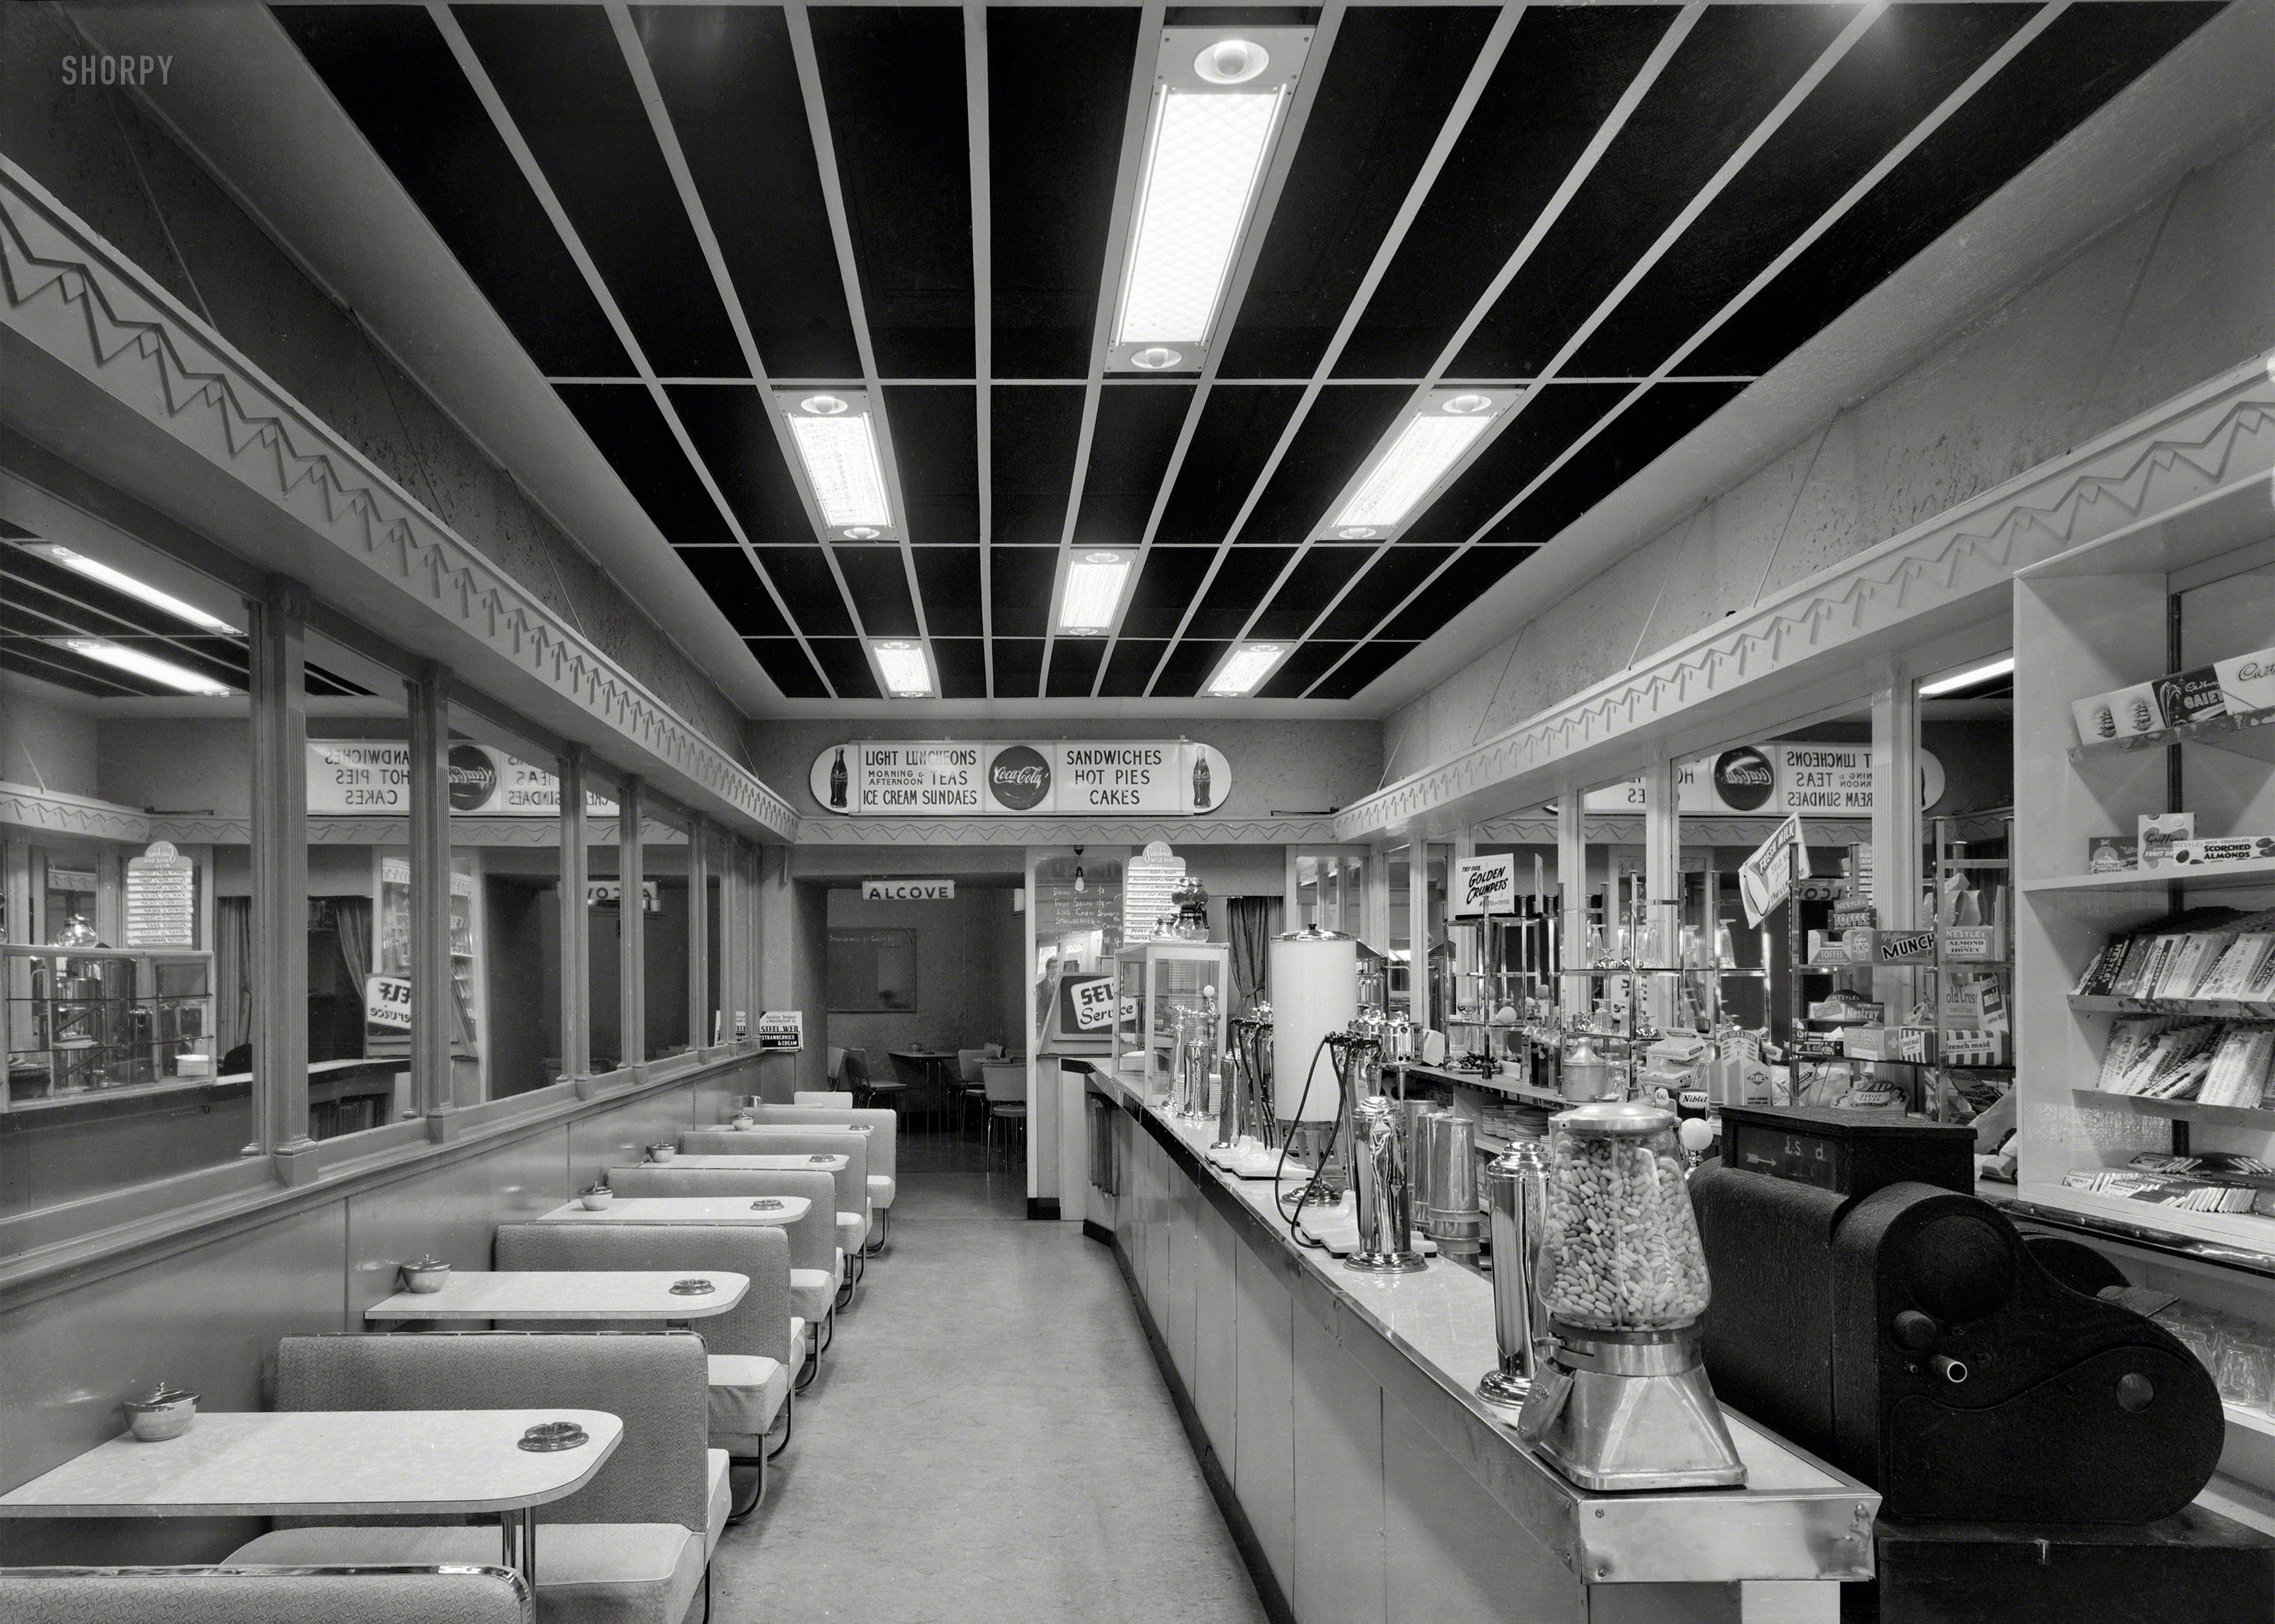 1950s. Wellington, New Zealand. "Interior of Sunshine Milk Bar lined with booths, photographed by K.E. Niven & Co." Large-format acetate negative, K.E. Niven & Co. Collection, Alexander Turnbull Library. View full size.